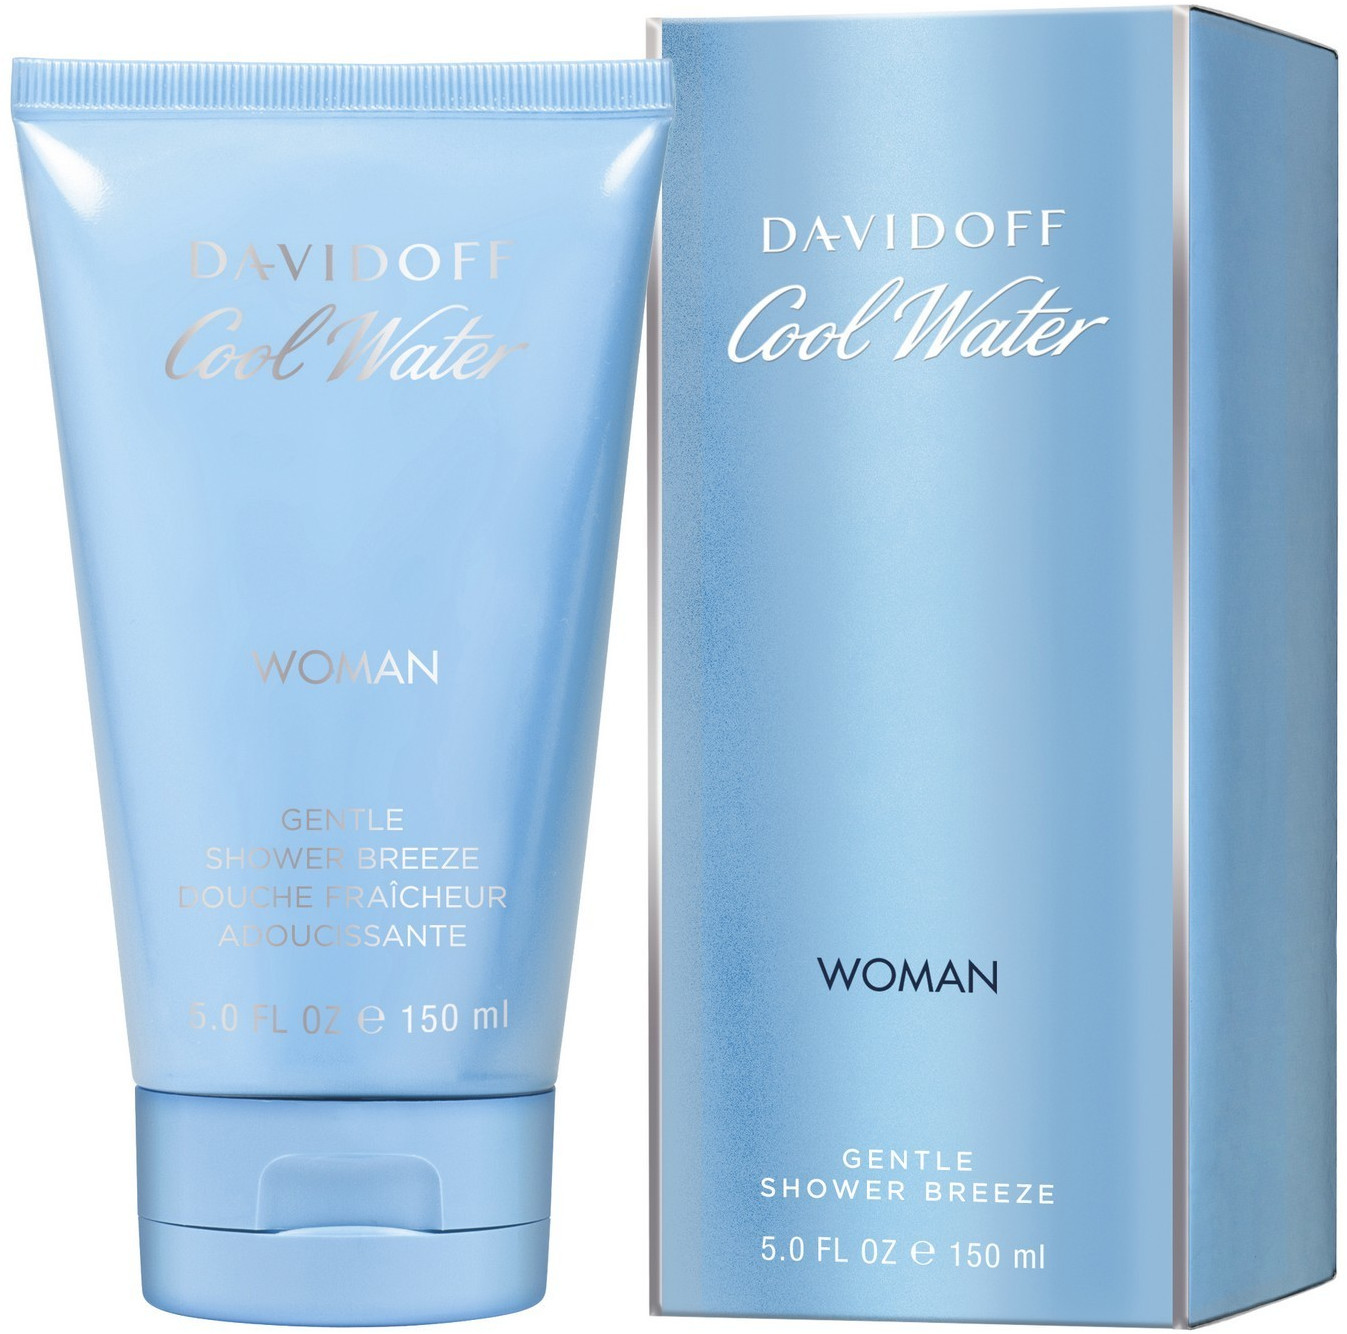 on Deals from Water – Woman Davidoff (Today) ml) Gel Cool Buy Shower Best (150 £4.17